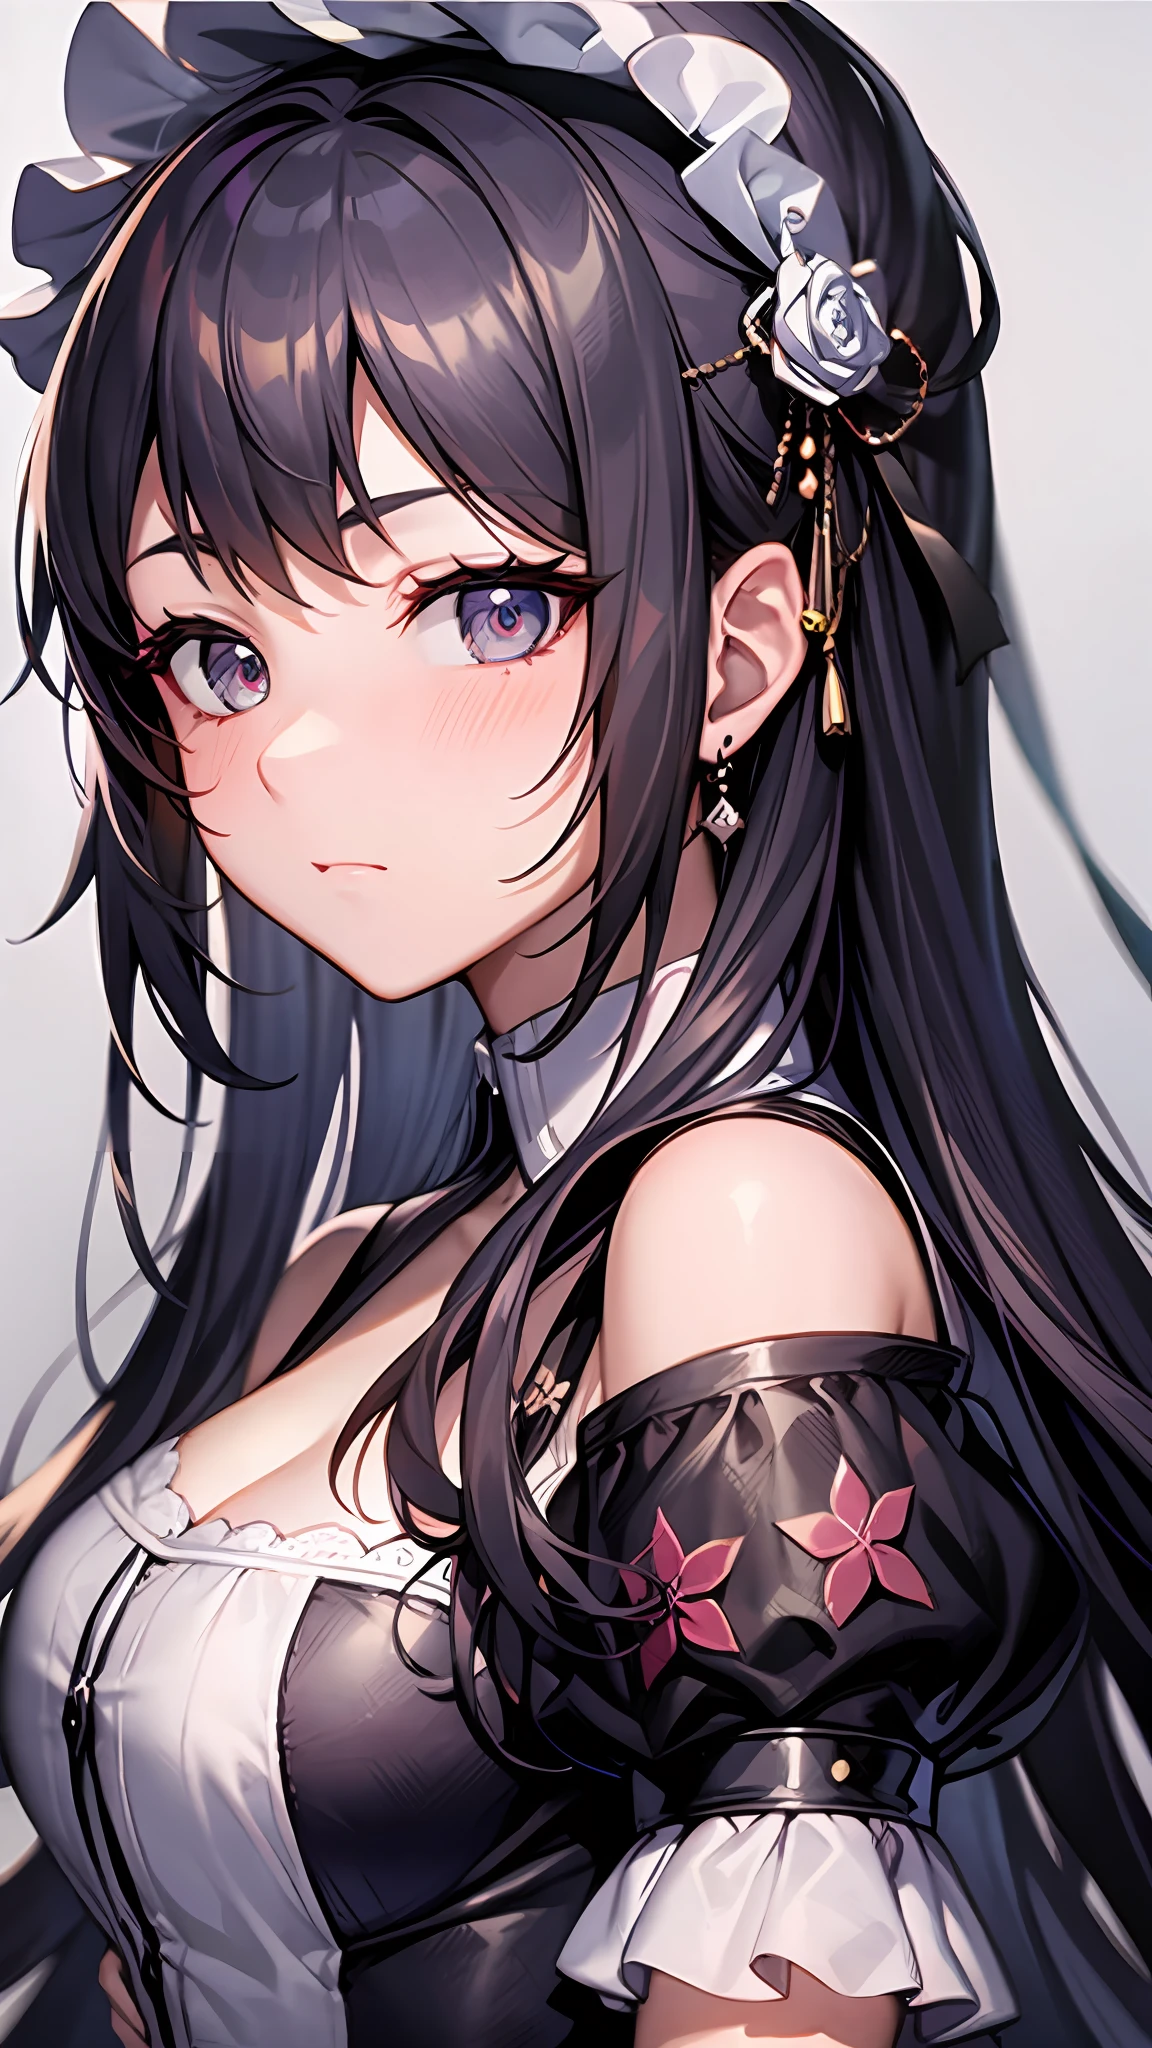 Close up portrait of woman in dress in white and black dress、Gothic Otome anime girl、anime girl wearing a black dress、Cute anime waifu in a nice dress、Anime girl in maid costume、Elegant Gothic princess、guweiz、Gwaits at Pixiv Art Station、Gwaitz at Art Station pixiv、beautiful anime girl、Blushing face、embarassed expression